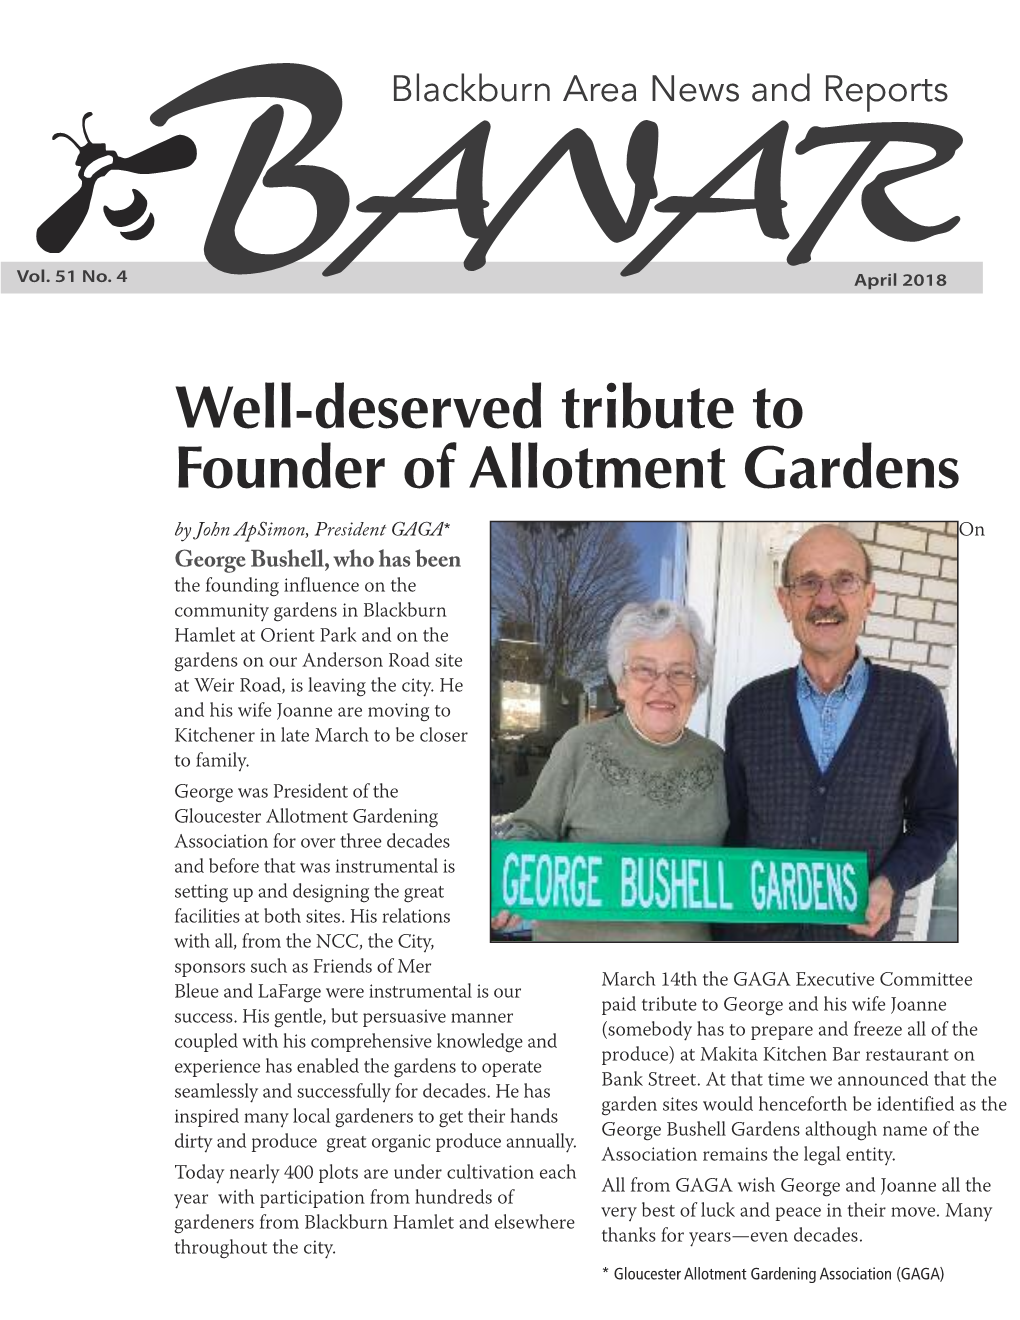 Well-Deserved Tribute to Founder of Allotment Gardens